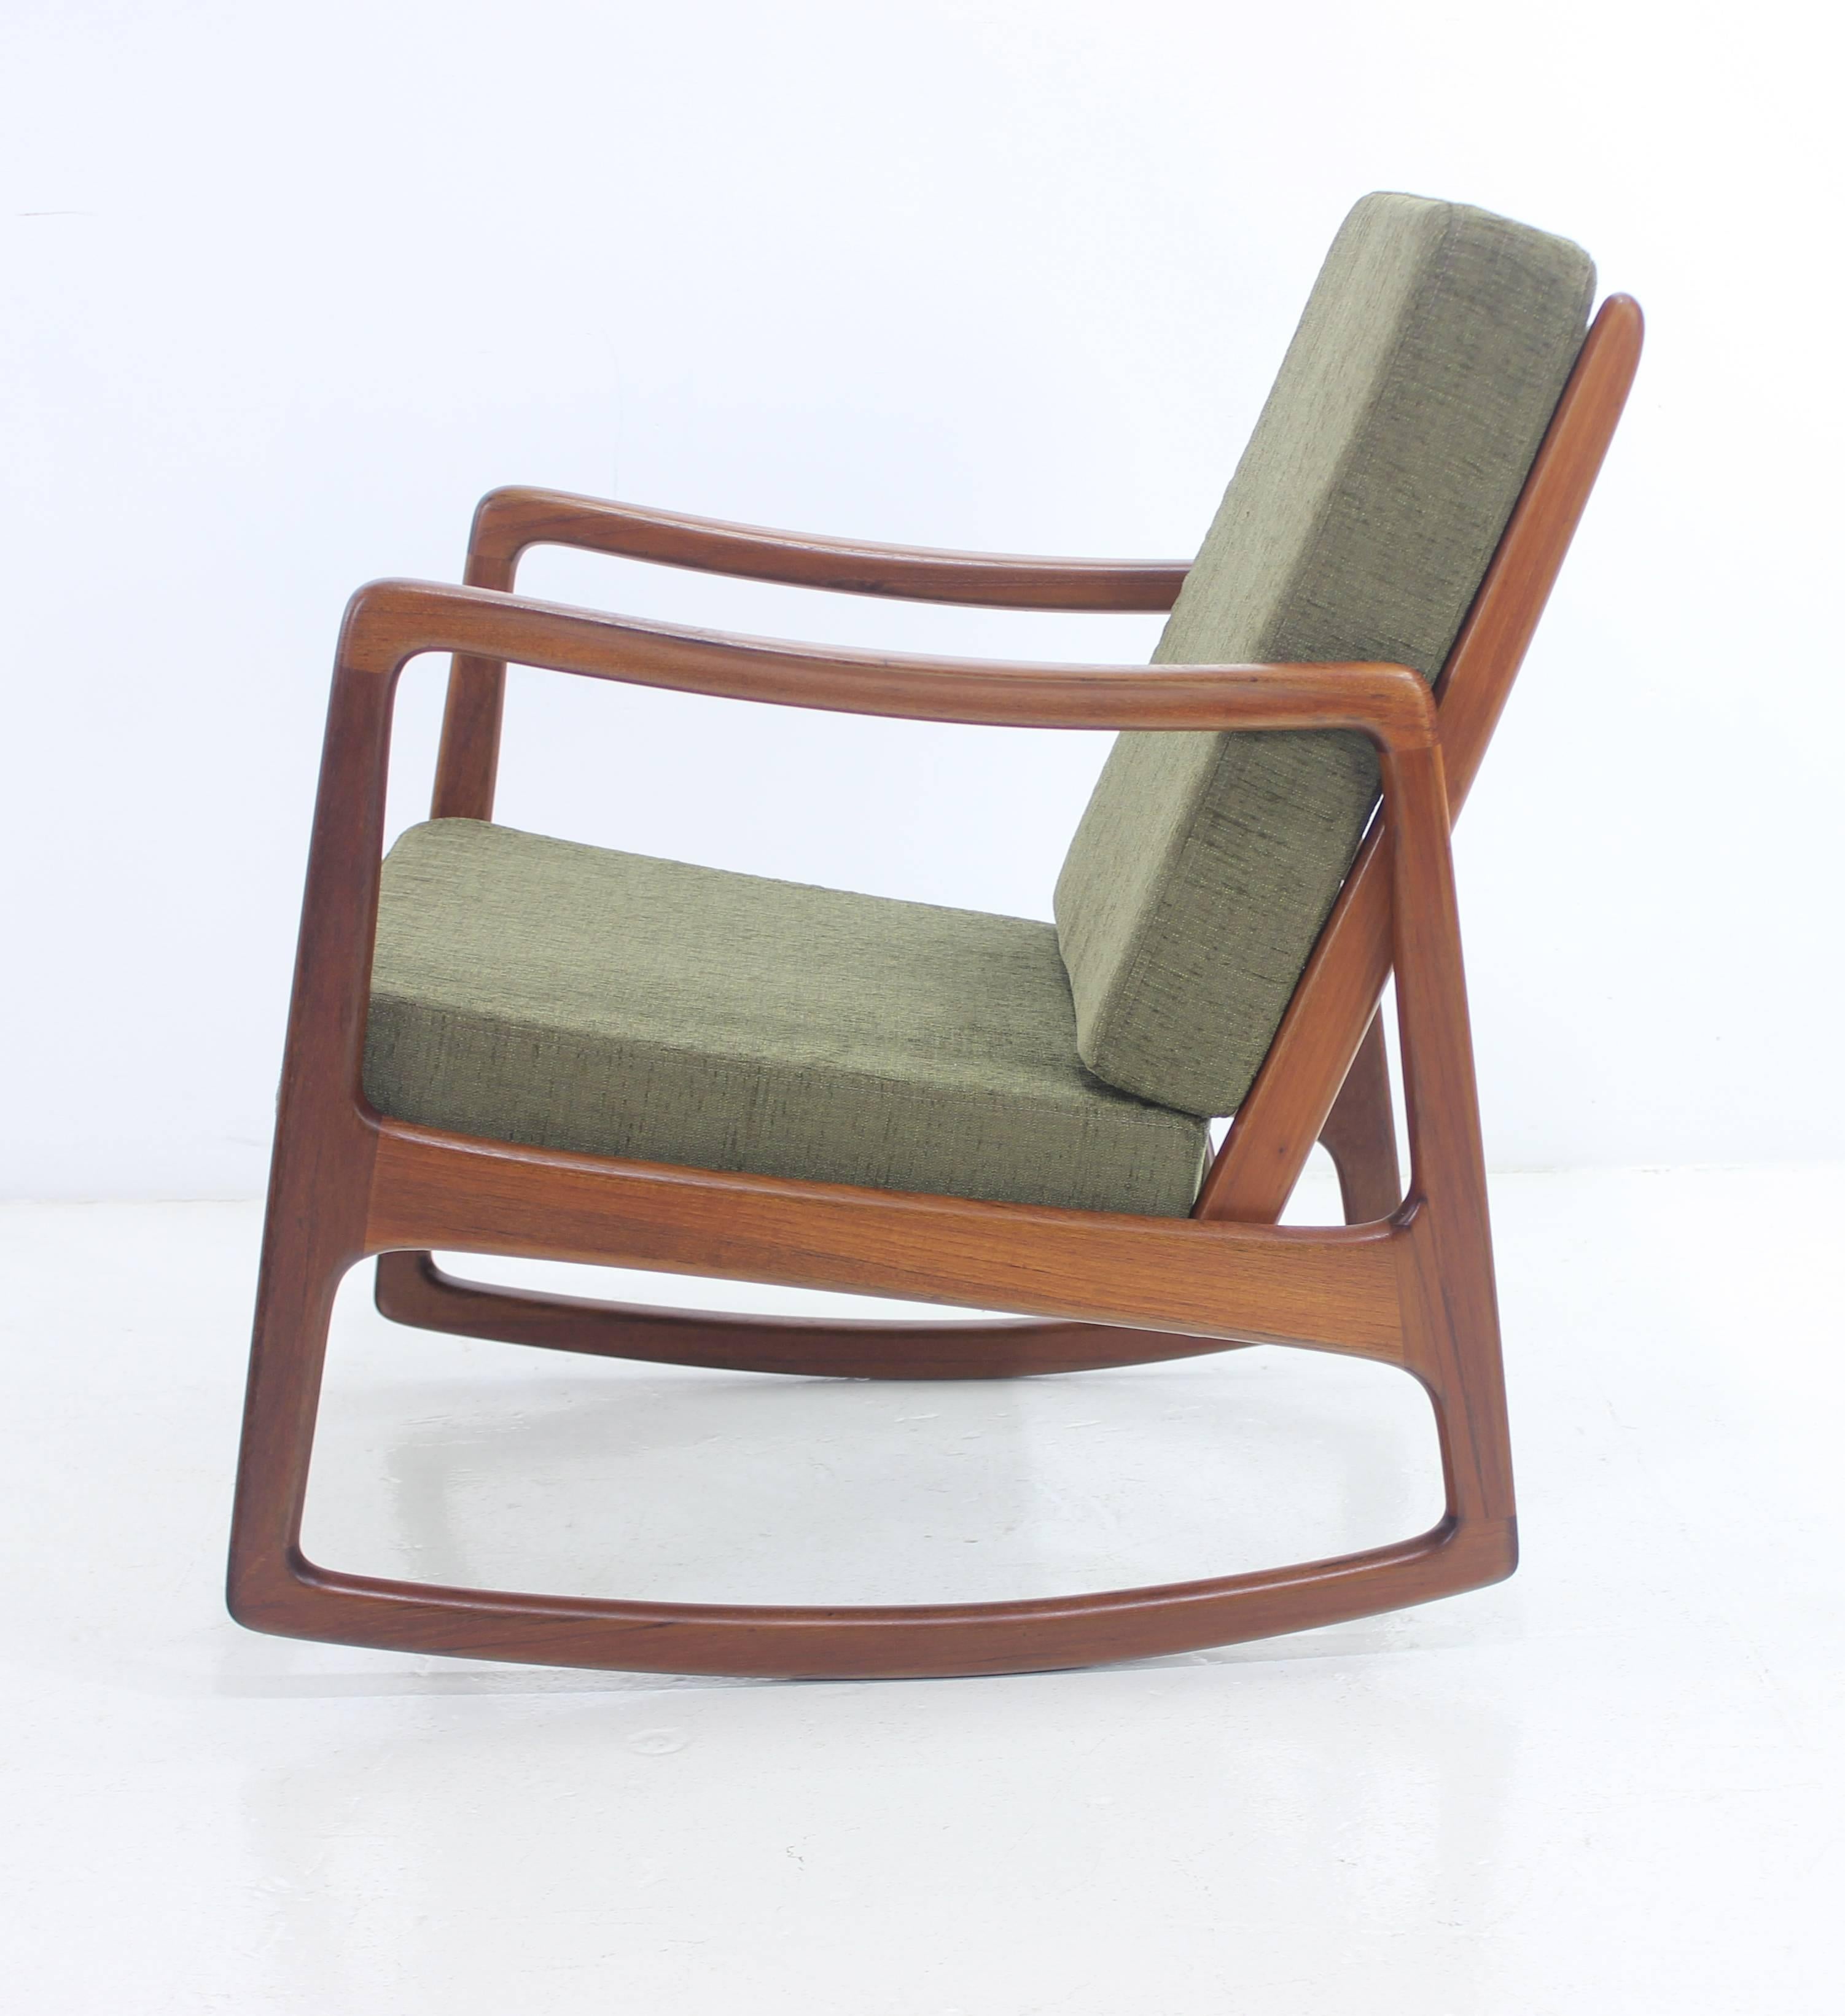 Danish modern rocker designed by Ole Wanscher.
Imported by John Stuart.
Rich teak frame.
Cushions with new foam, newly upholstered in highest quality period fabric.
Professionally restored and refinished by LookModern.
Matchless quality and